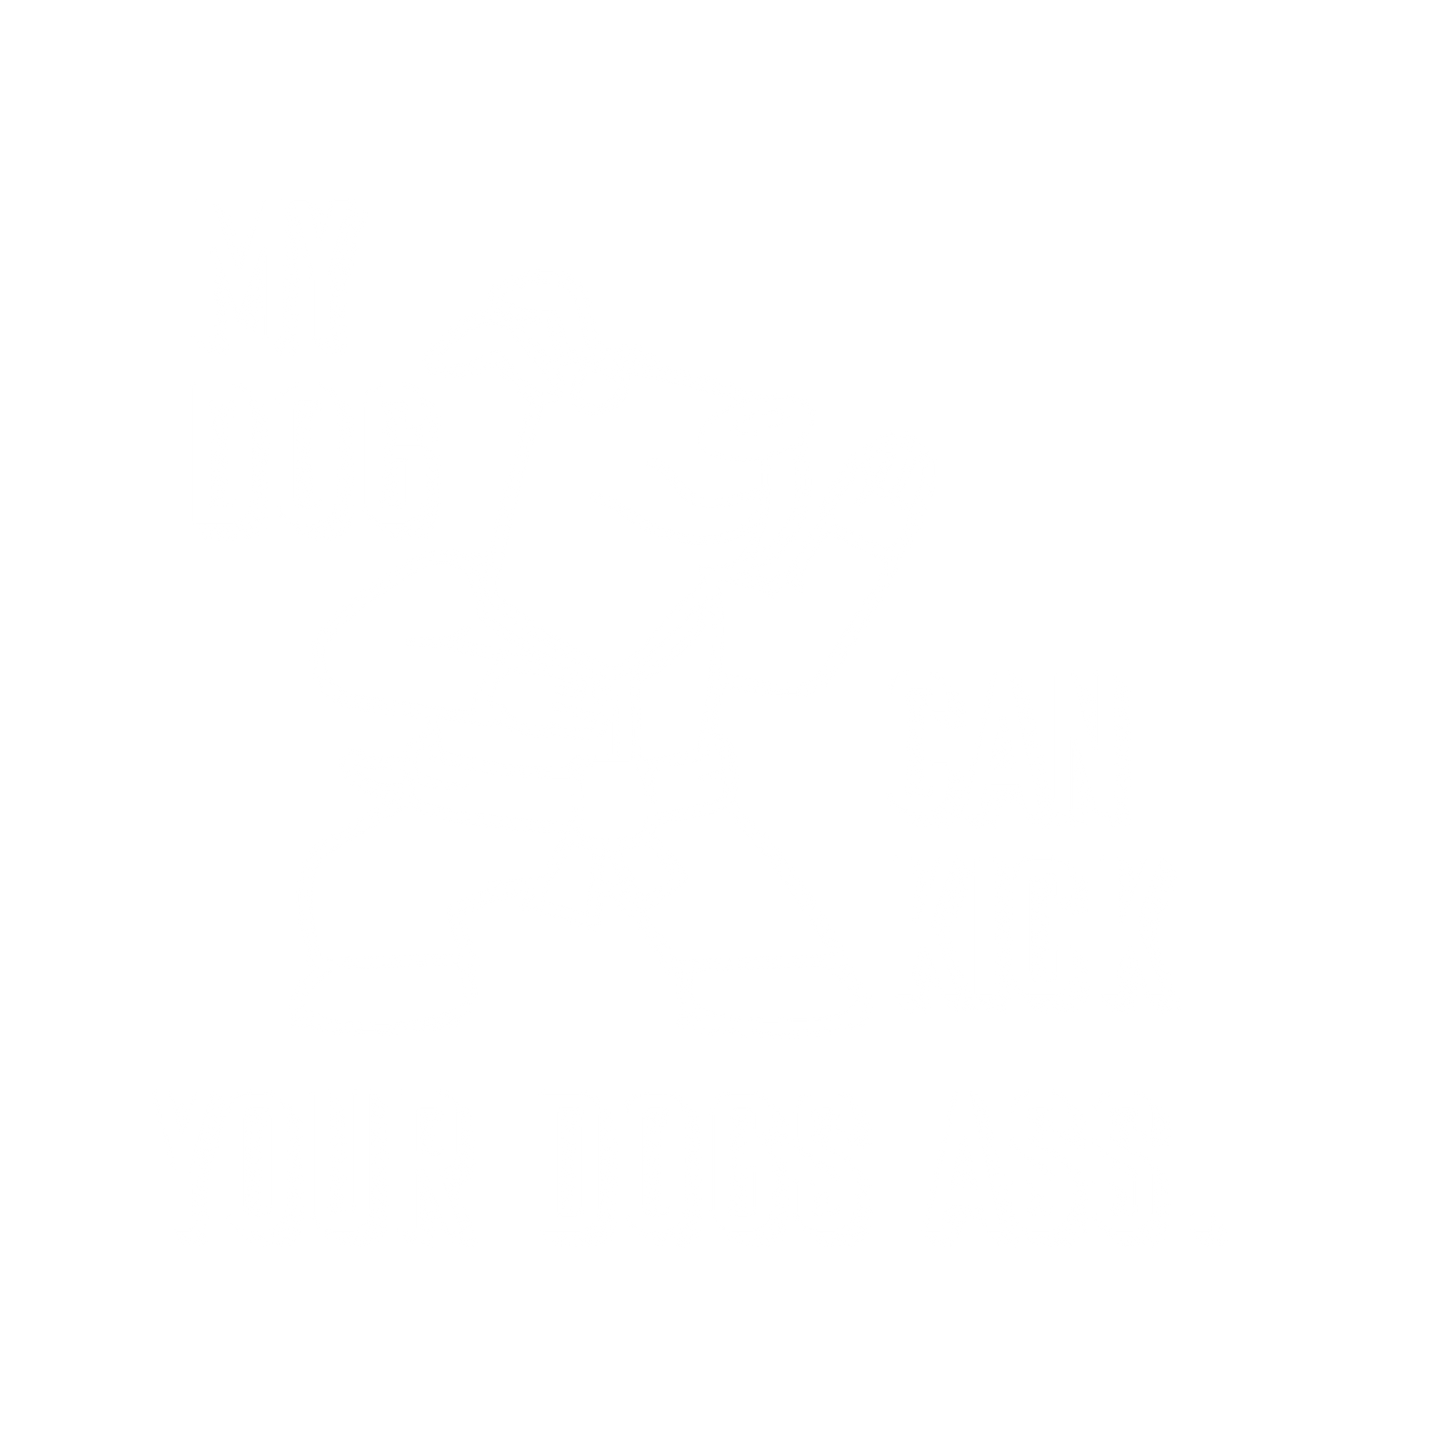 My Dog Can Kick Your Dogs Ass.